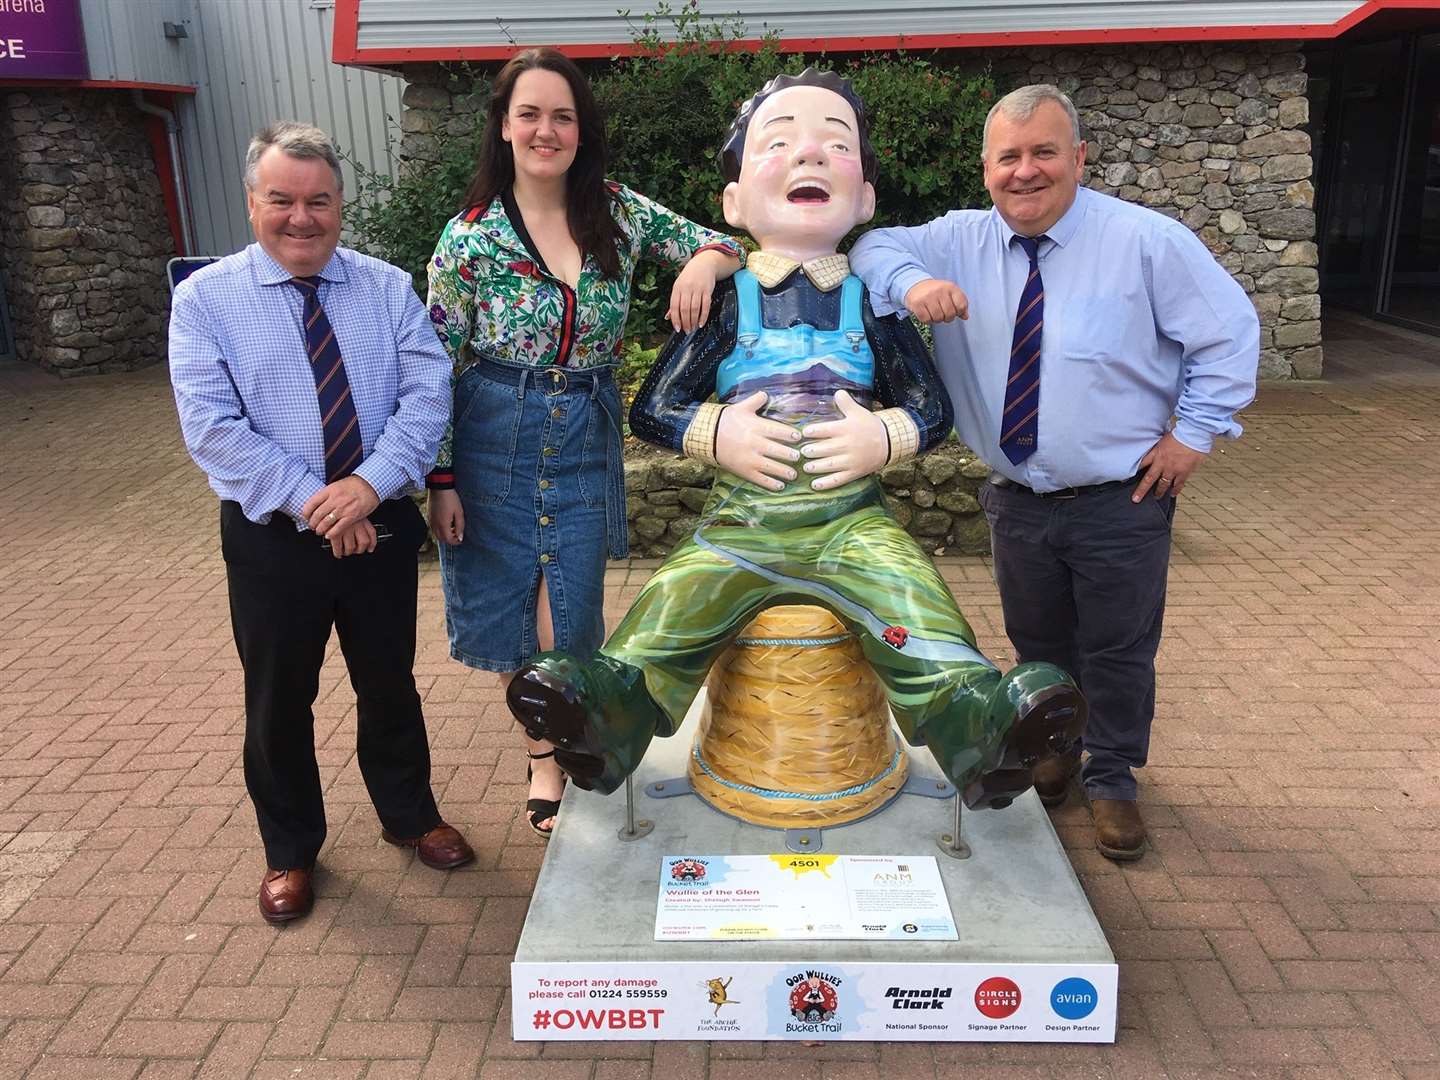 Shelagh Swanson with ANM auctioneers Alan Hutcheon (left) and Colin Slessor beside the Wullie of the Glen sculpture at Thainstone.